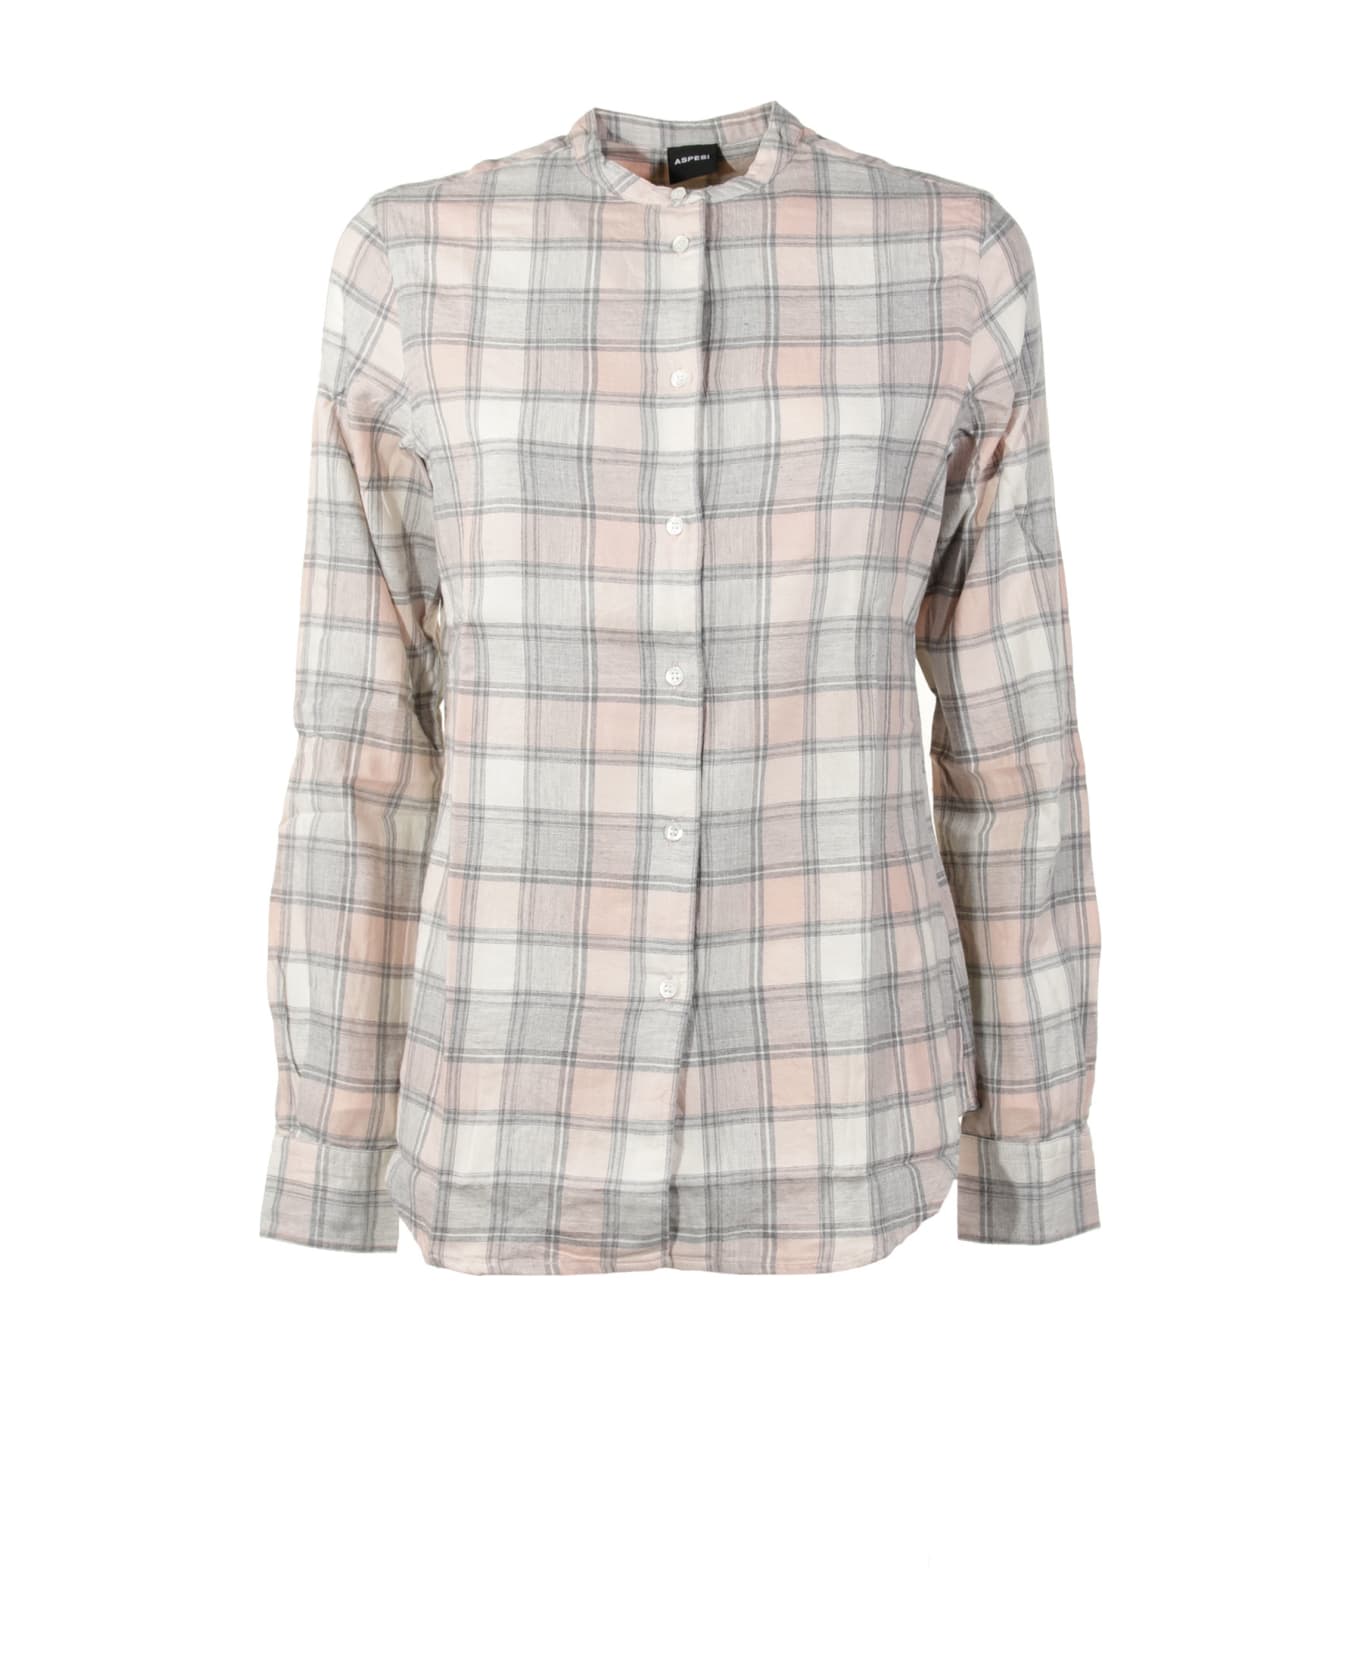 Aspesi Shirt With Checked Pattern - ROSA シャツ